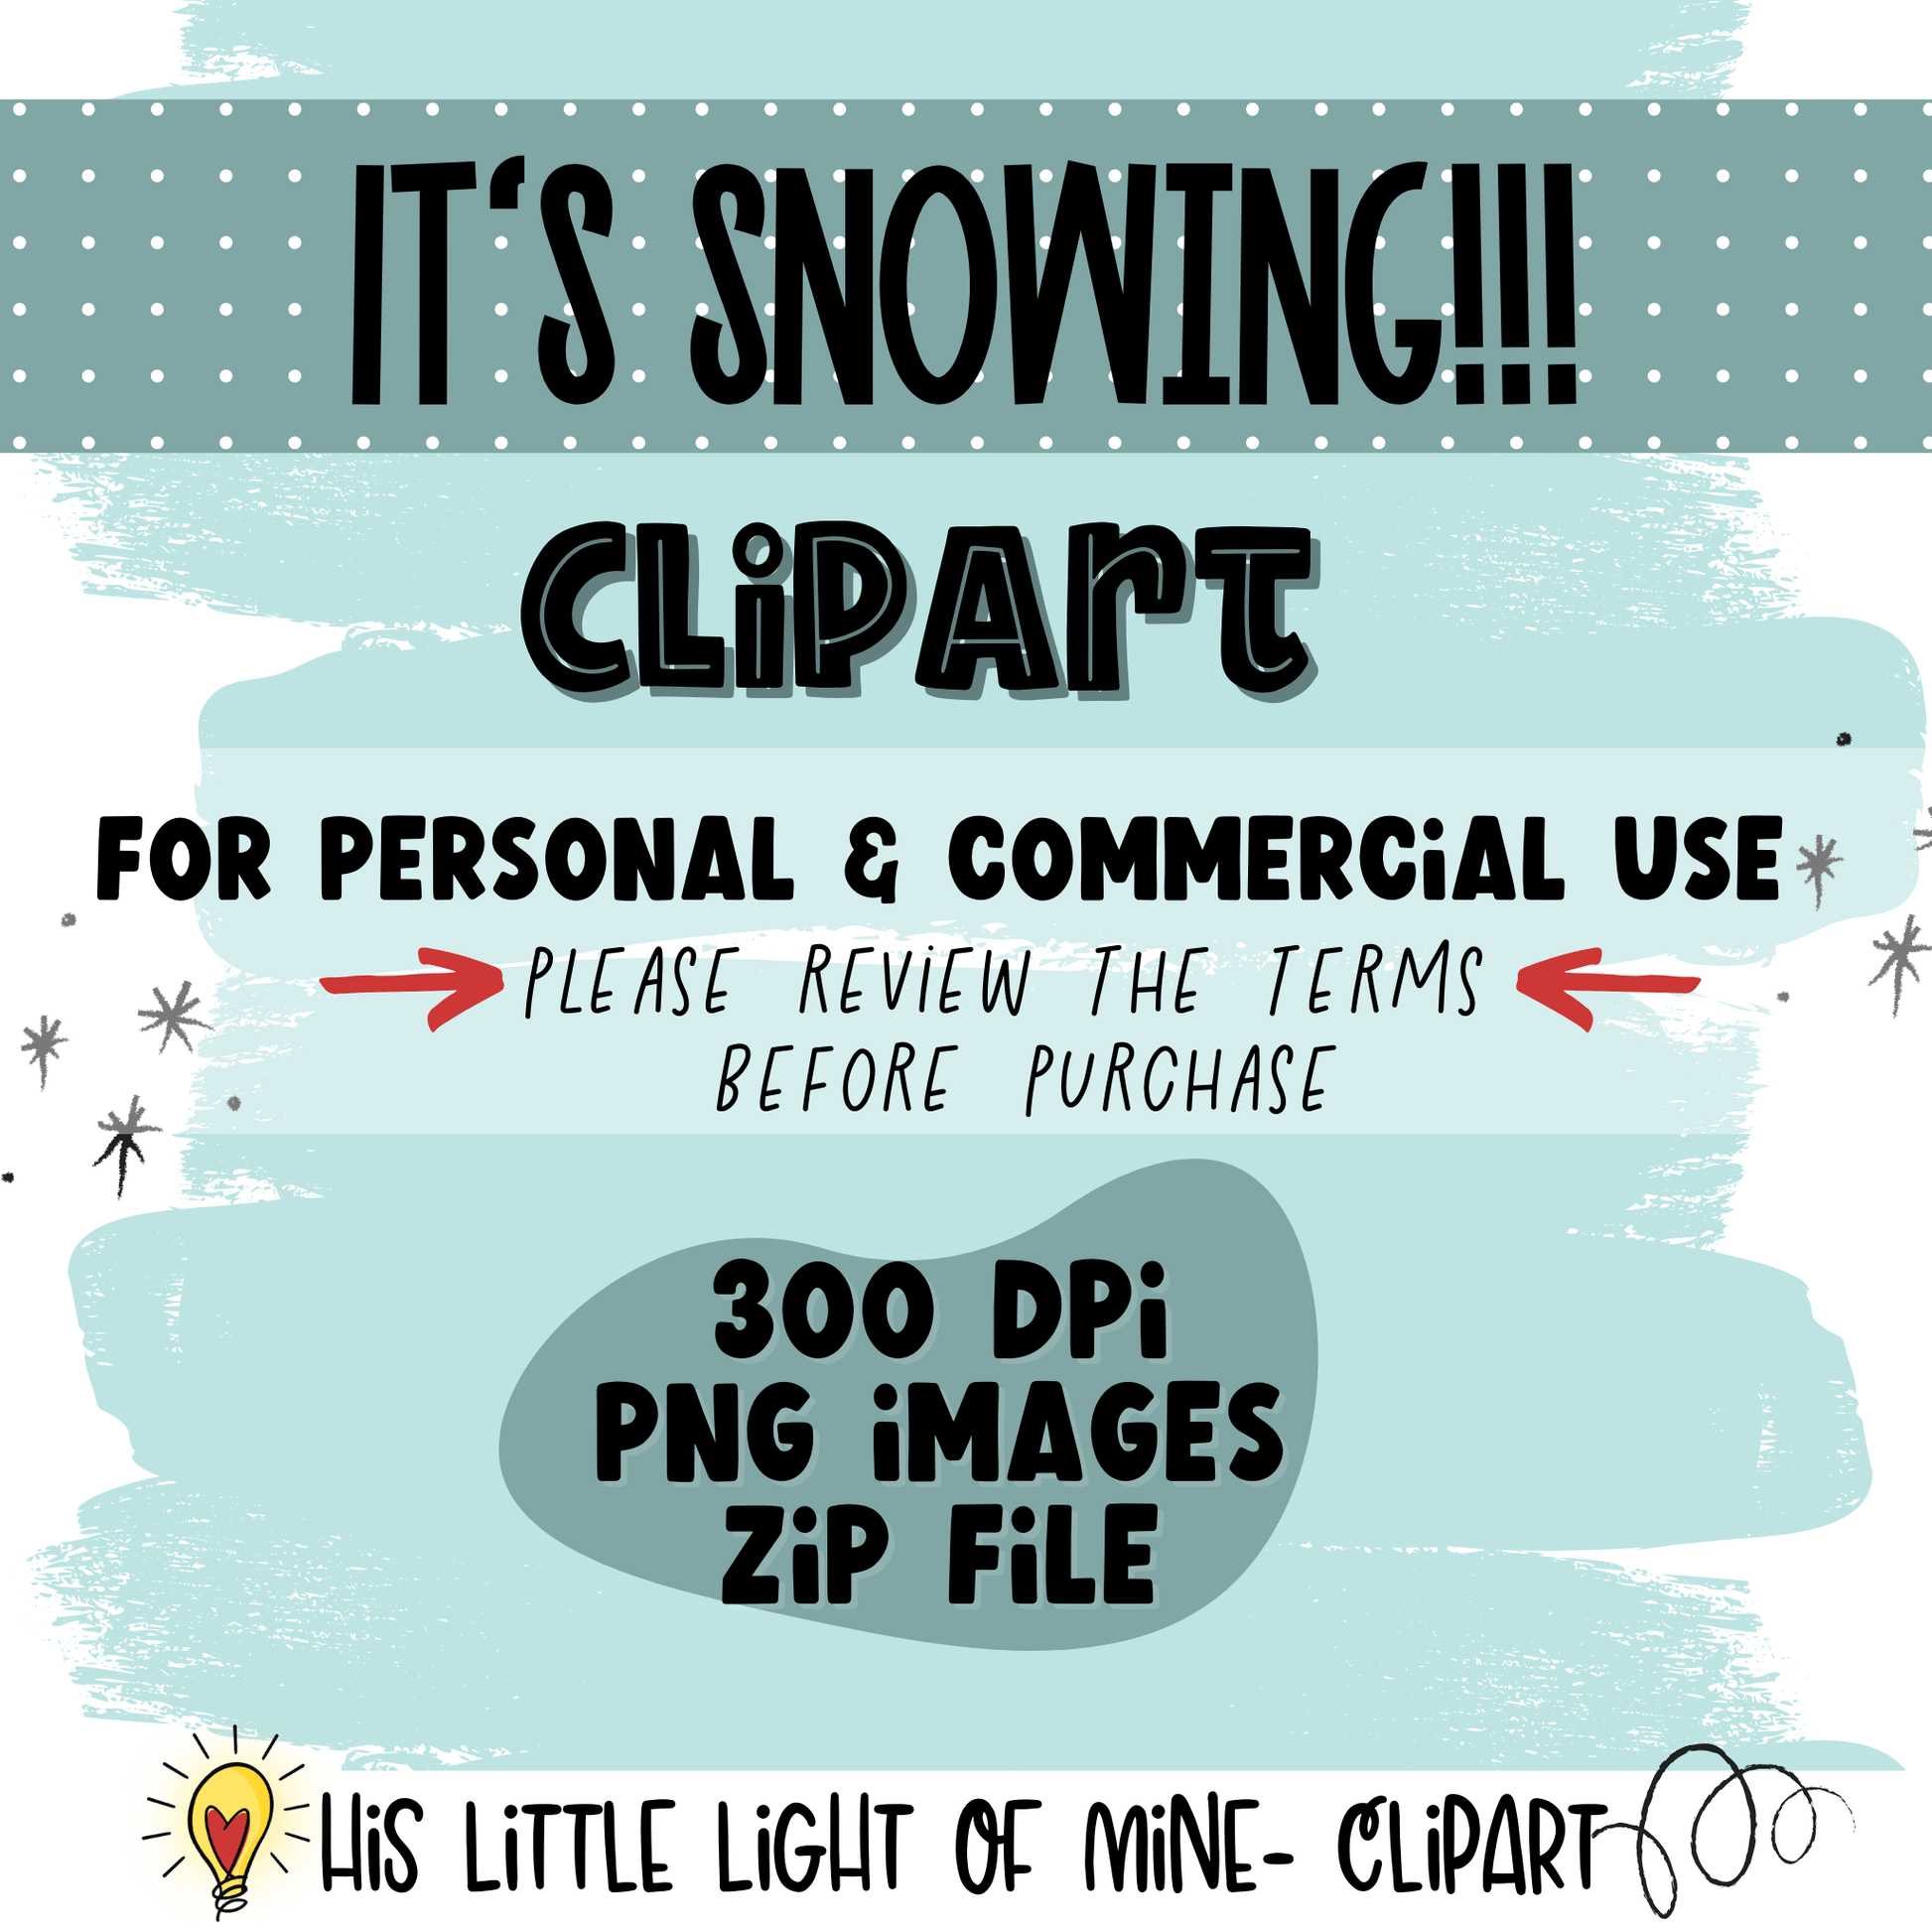 It’s Snowing clip art pack features both personal and commercial use (with terms) and the types and sizes of the files. 